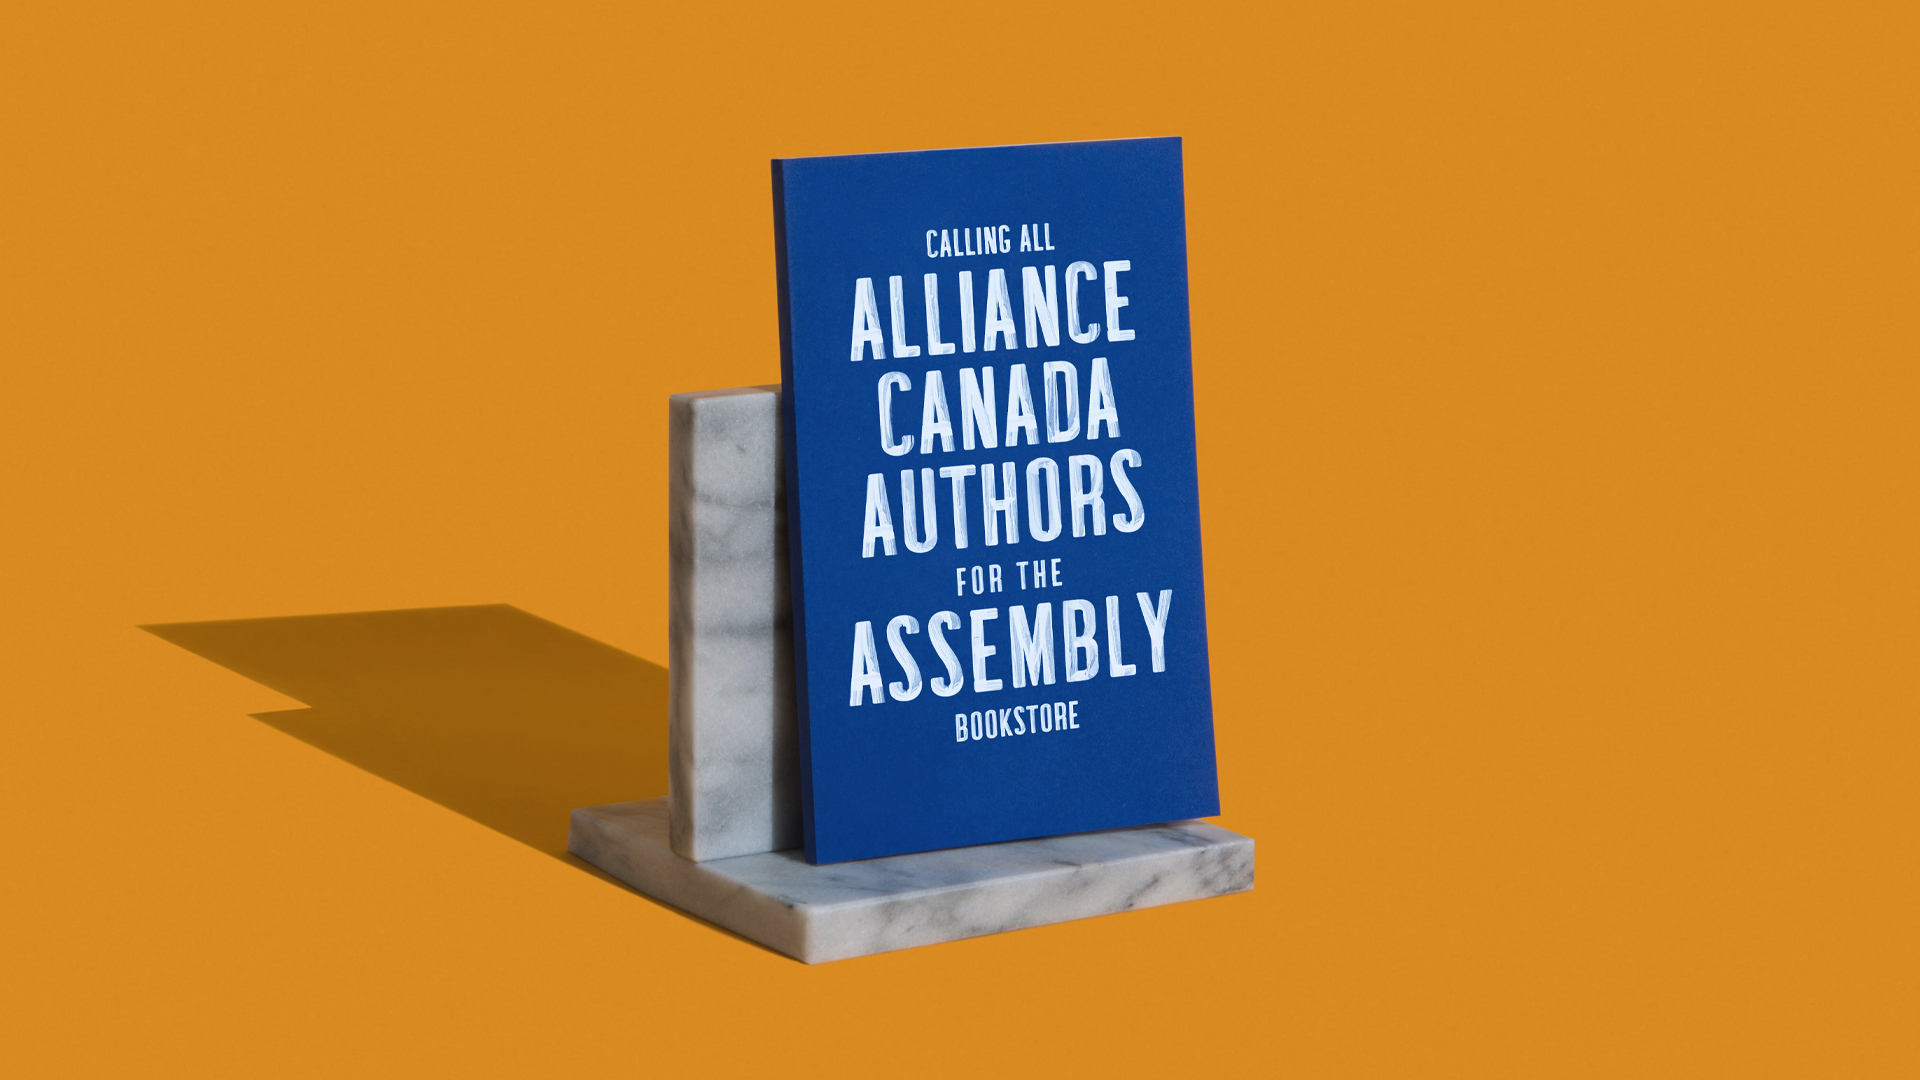 Featured image for “Call for Canadian Alliance Authors”